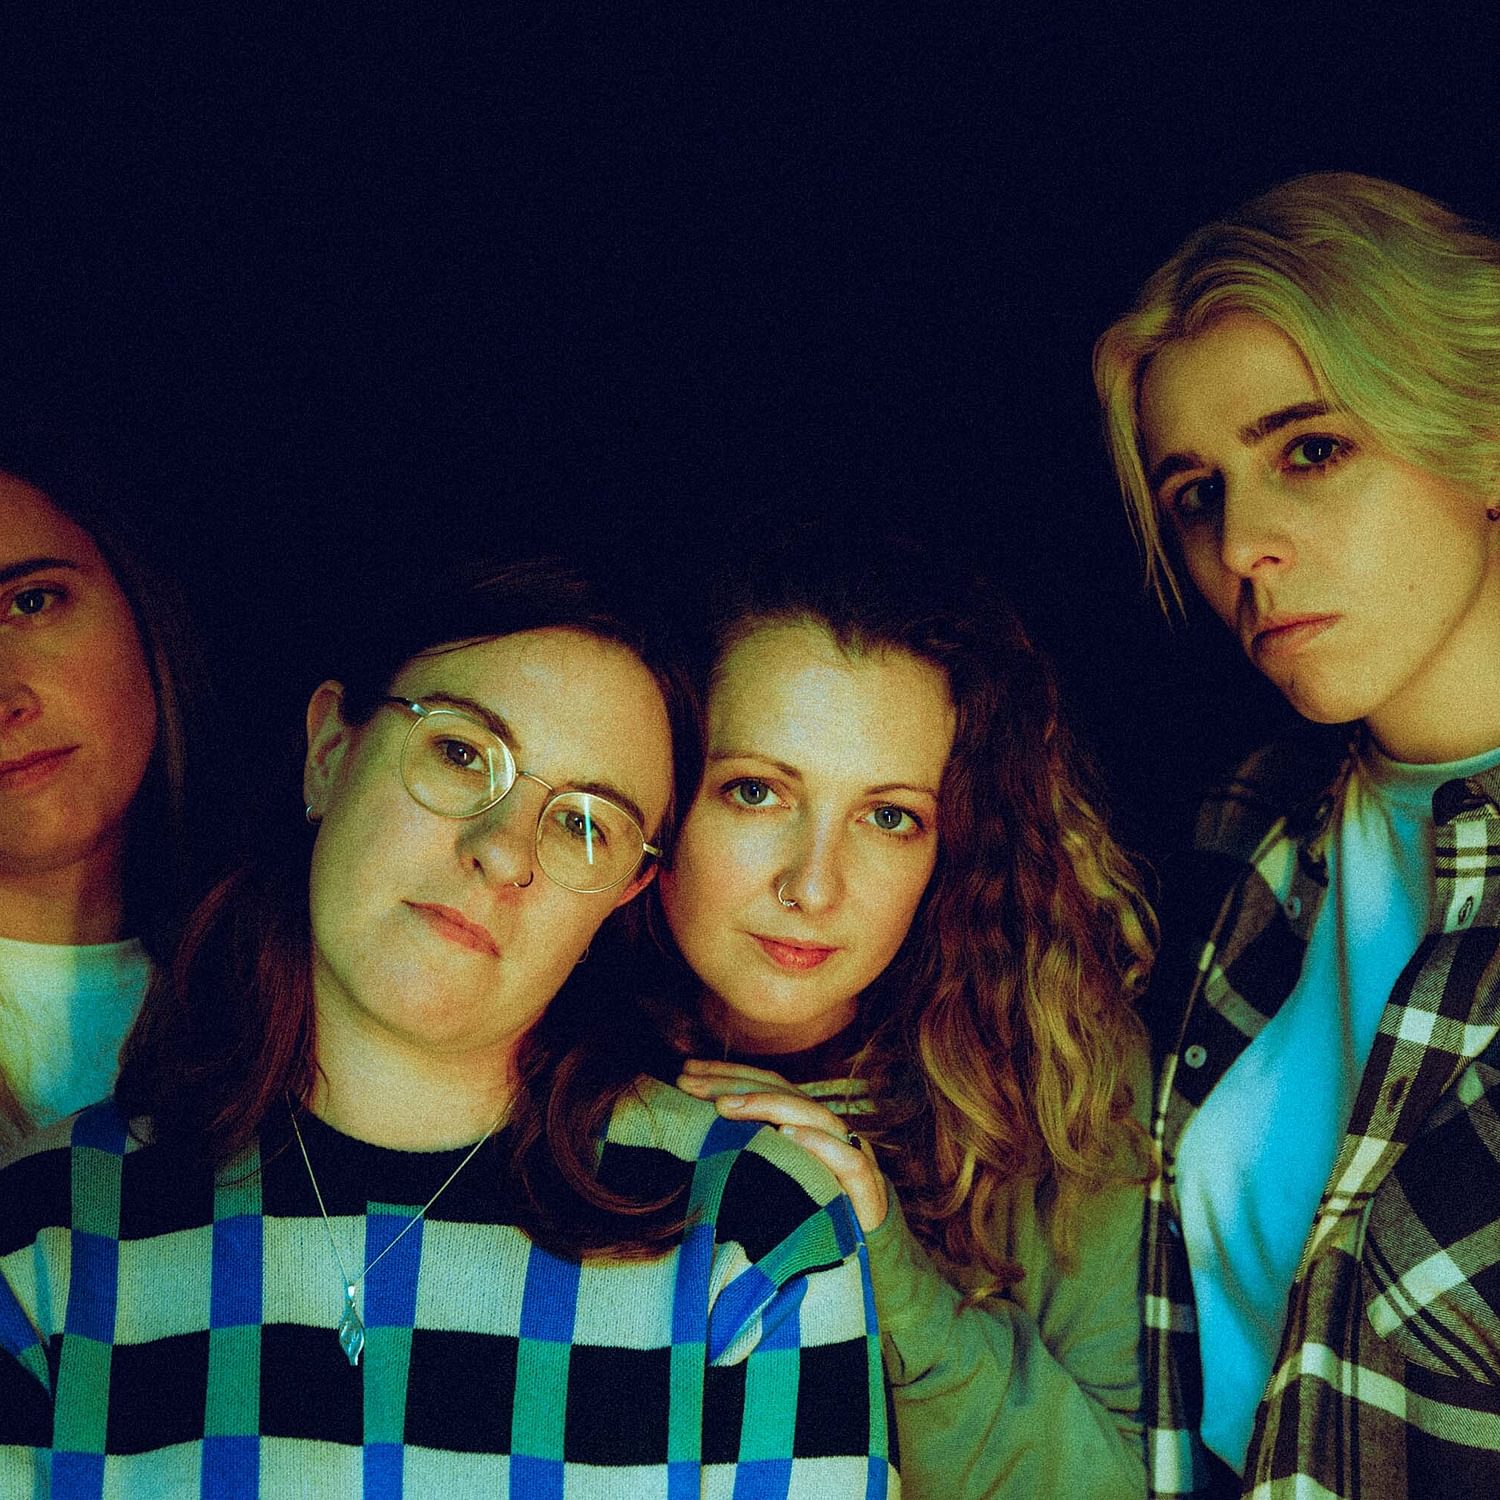 Pillow Queens on the thriving Irish scene, literary inspirations, and their vulnerable third album 'Name Your Sorrow'